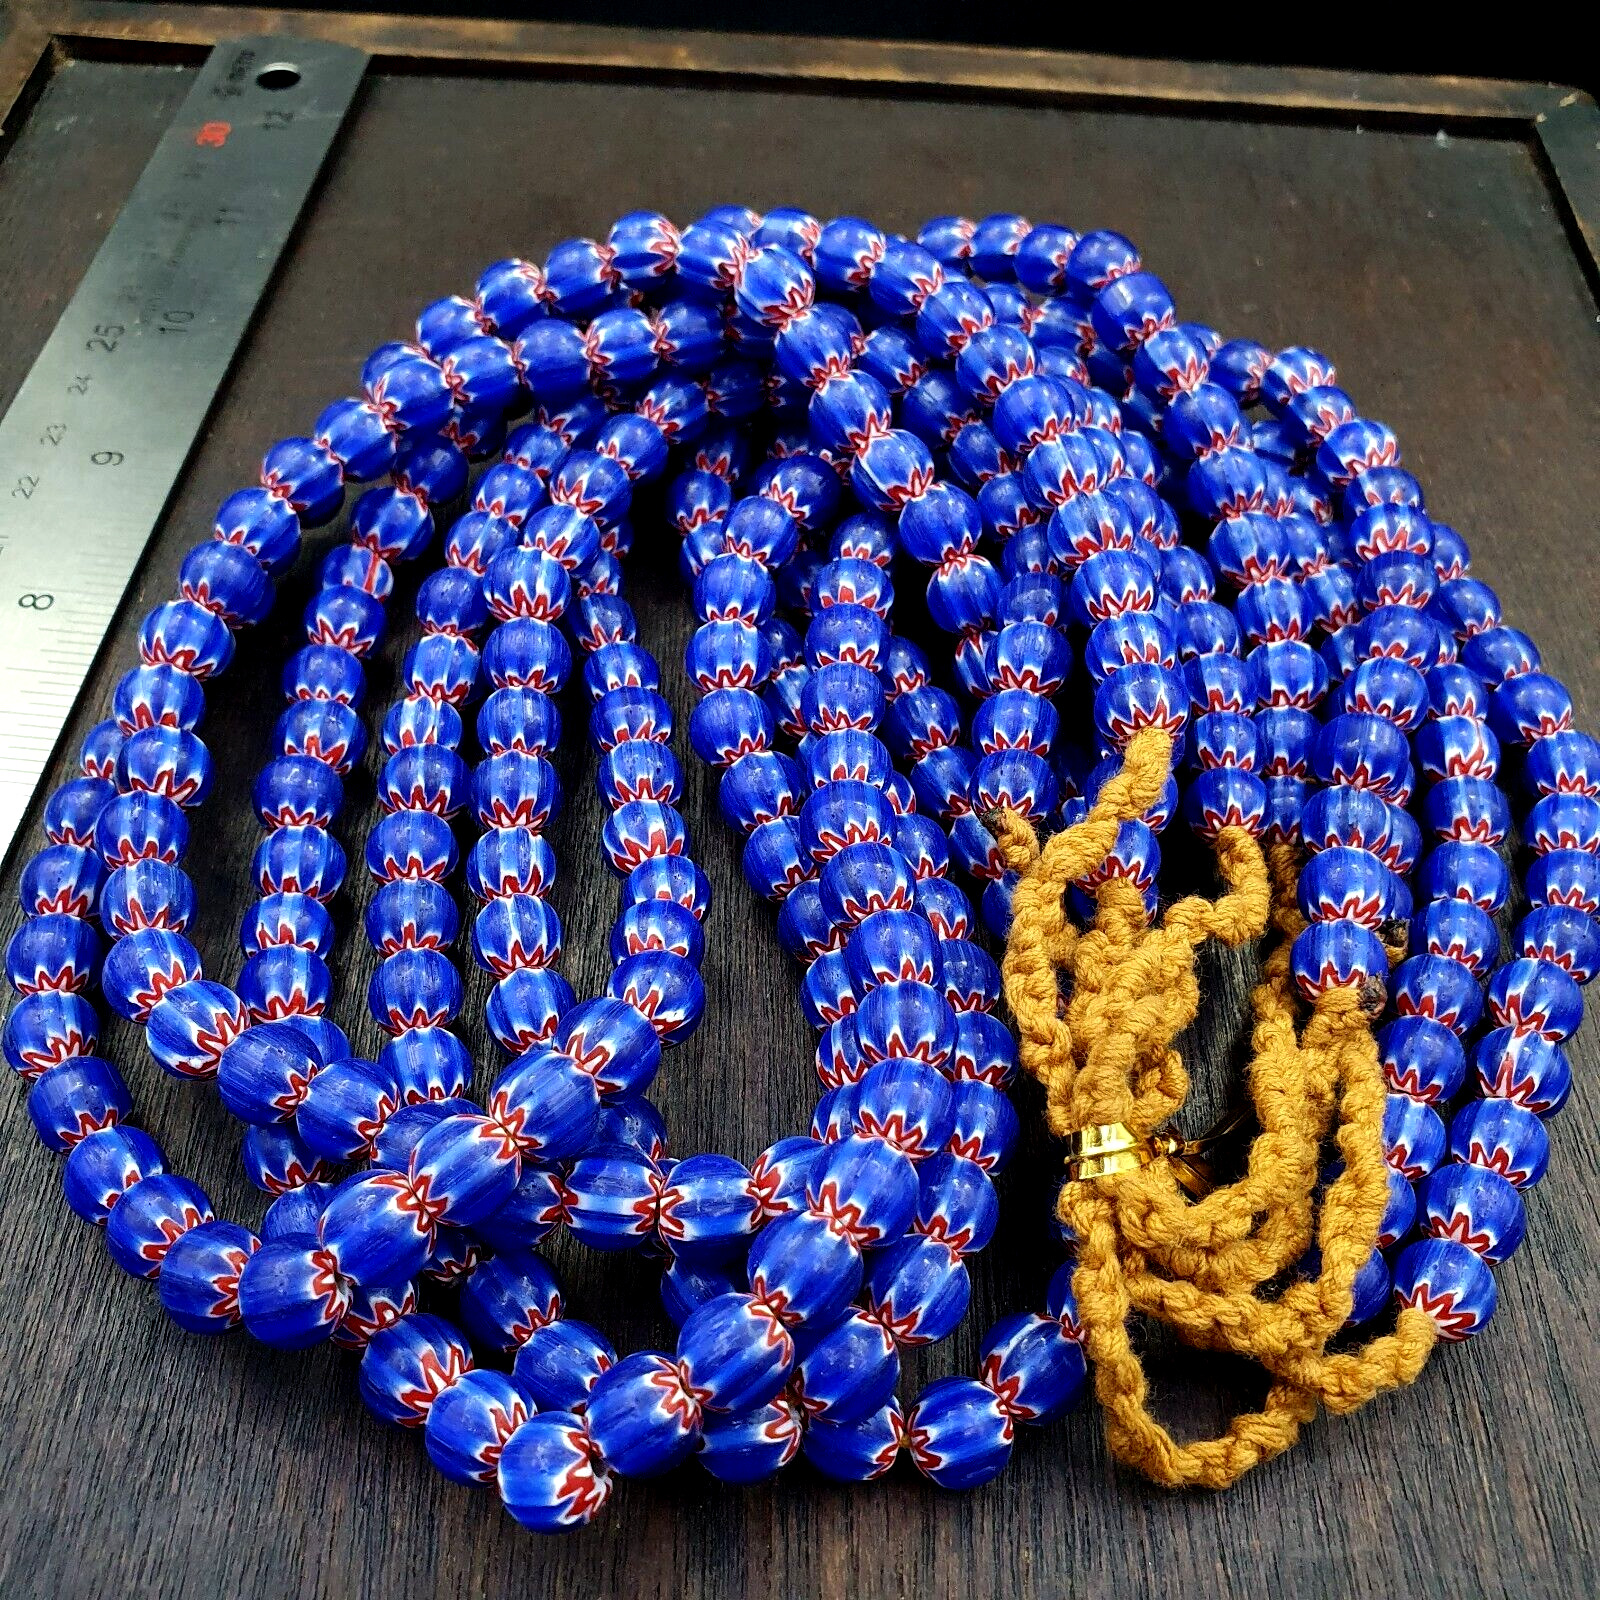 Vintage Old Blue Chevron Trade beads Old African9-9.5mm Glass Beads Necklace